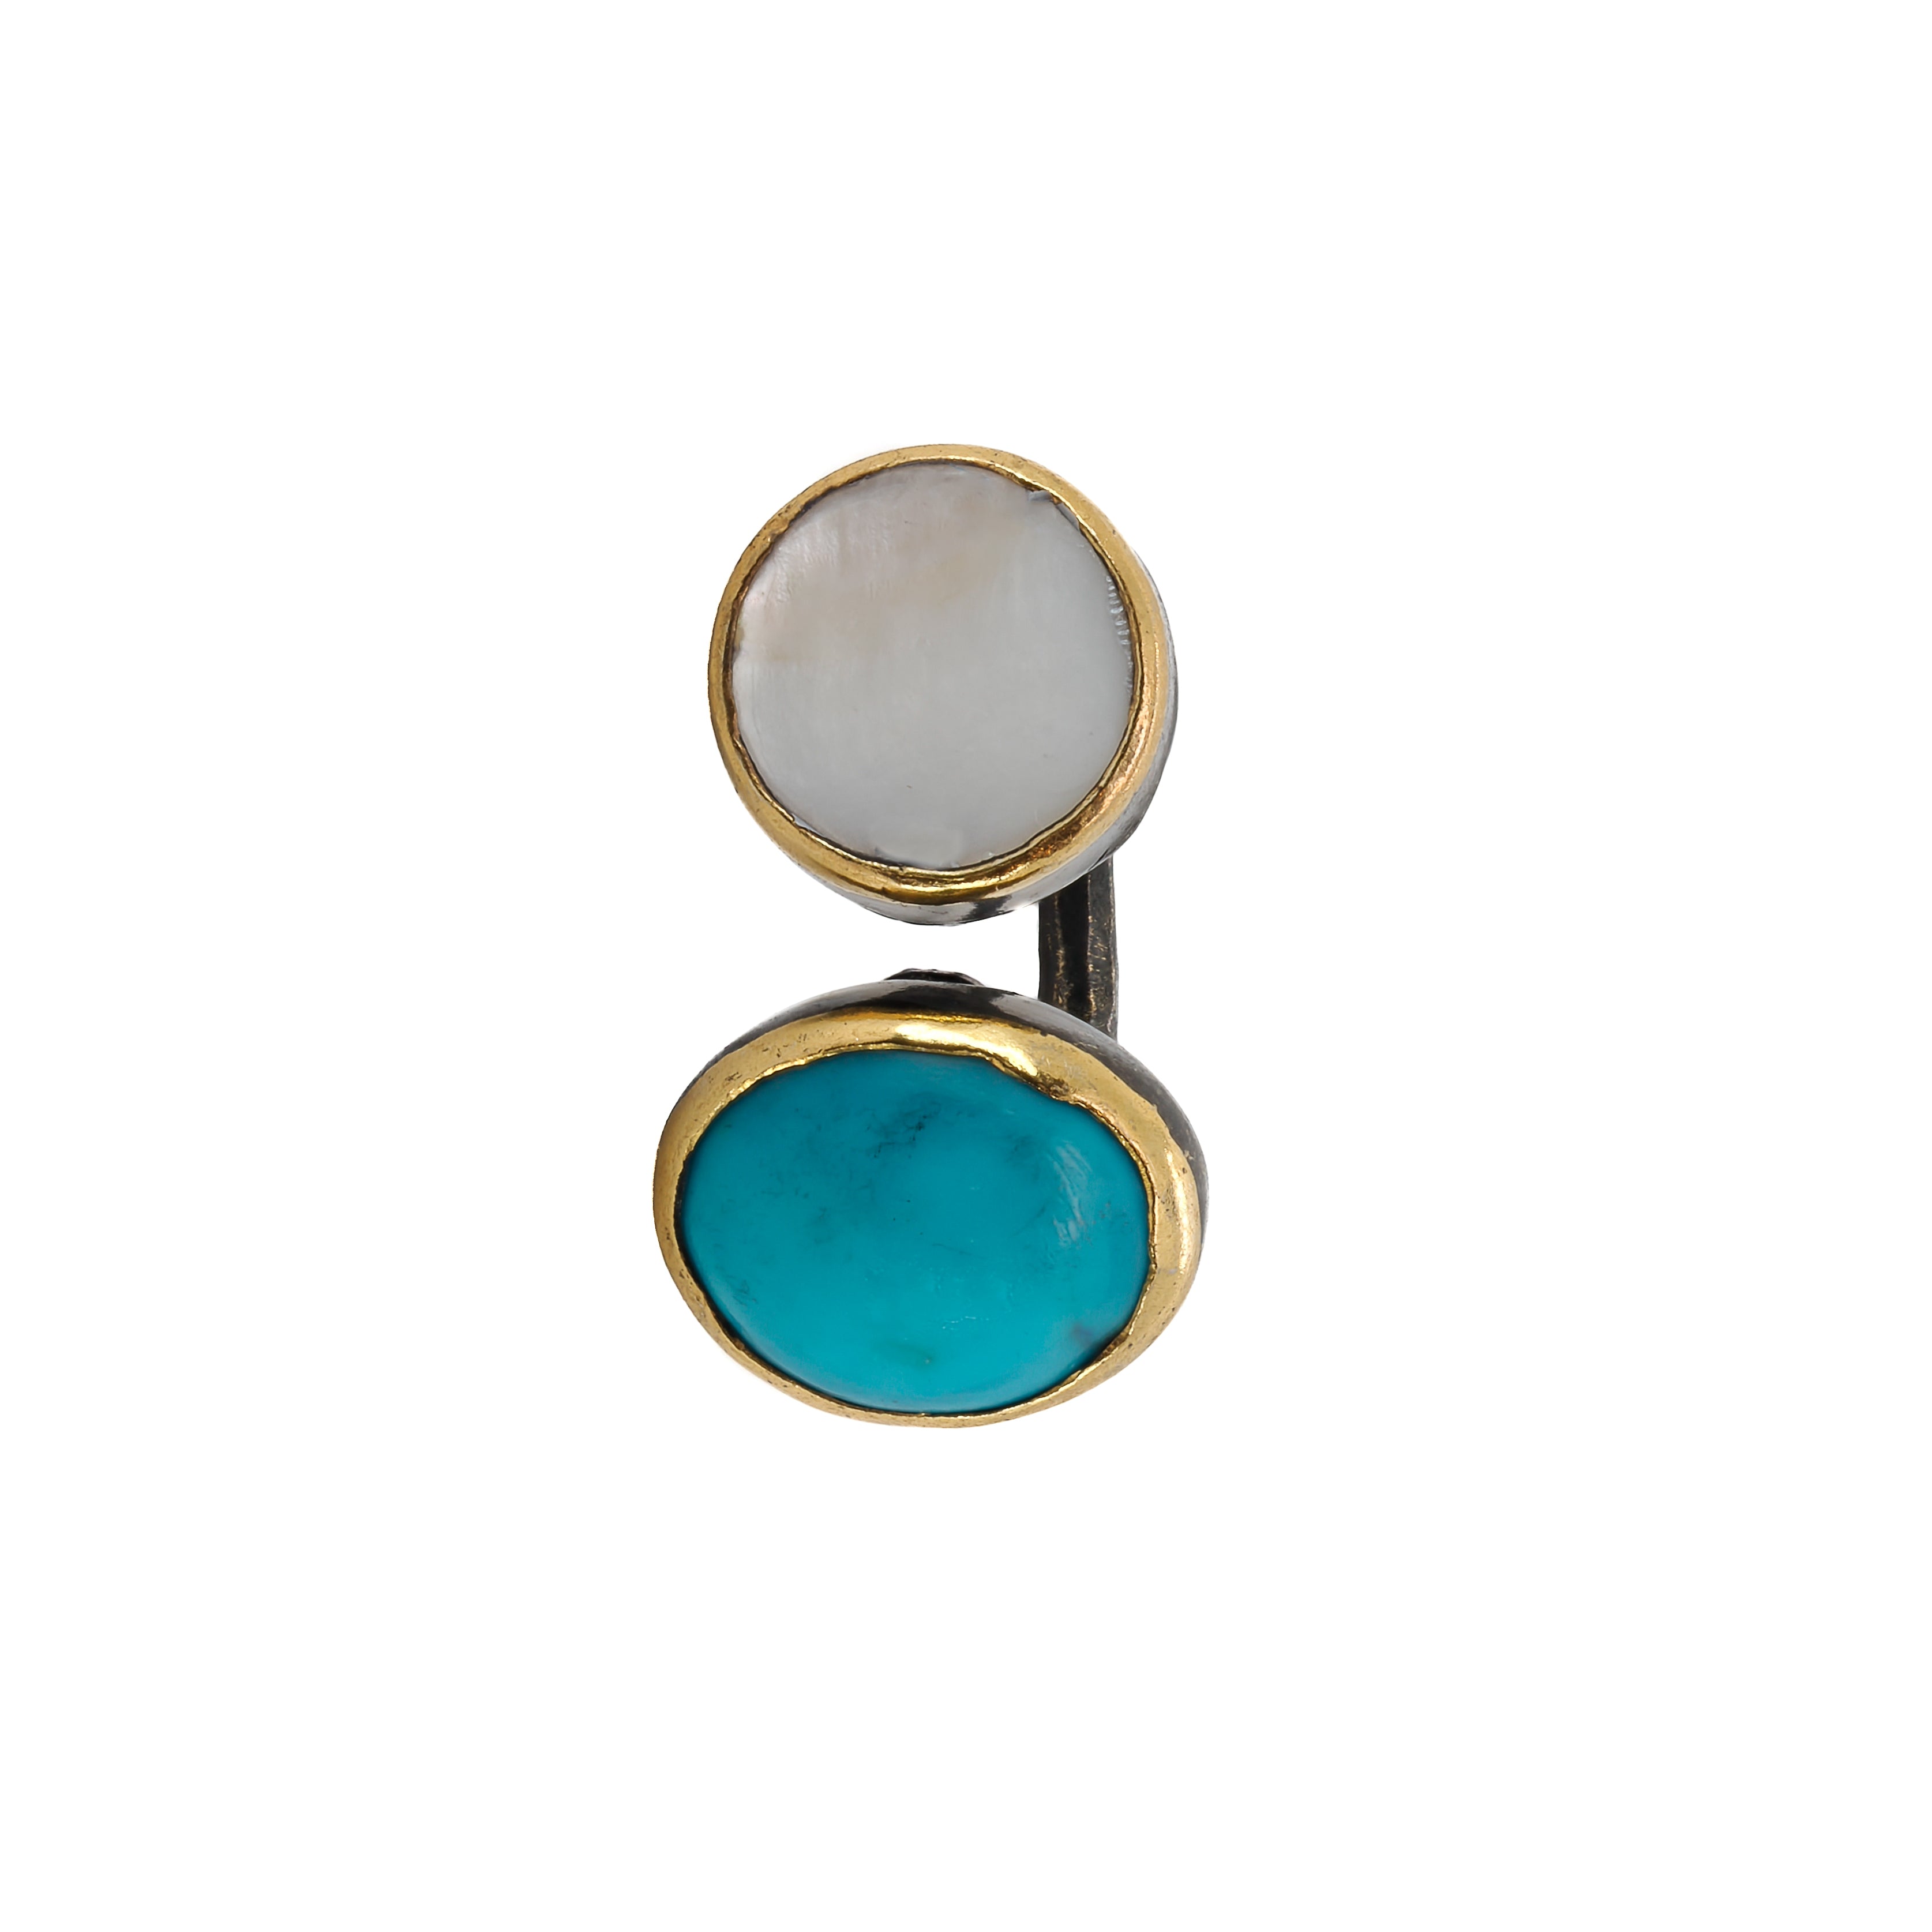 A closer look at the graceful synergy of Pearl and Turquoise in the ring&#39;s centerpiece.